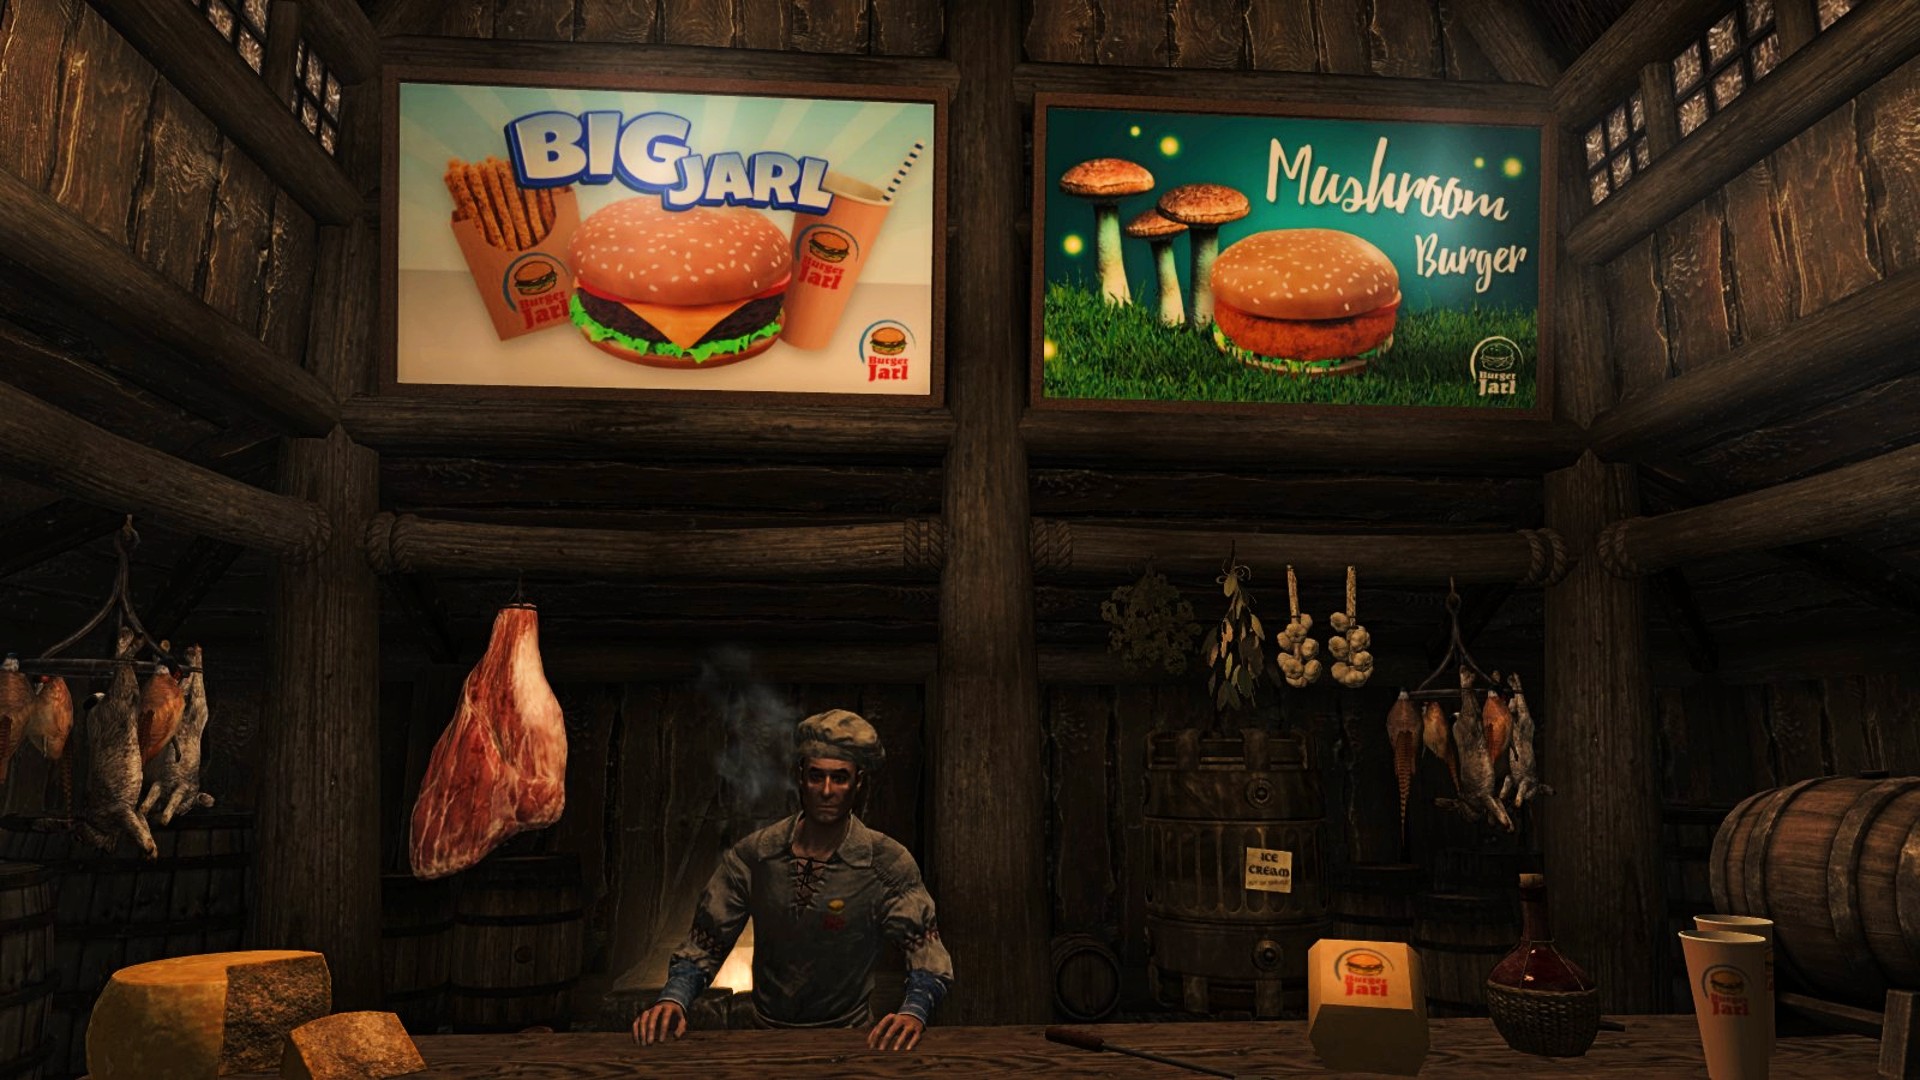 Skyrim mod adds a fast food joint